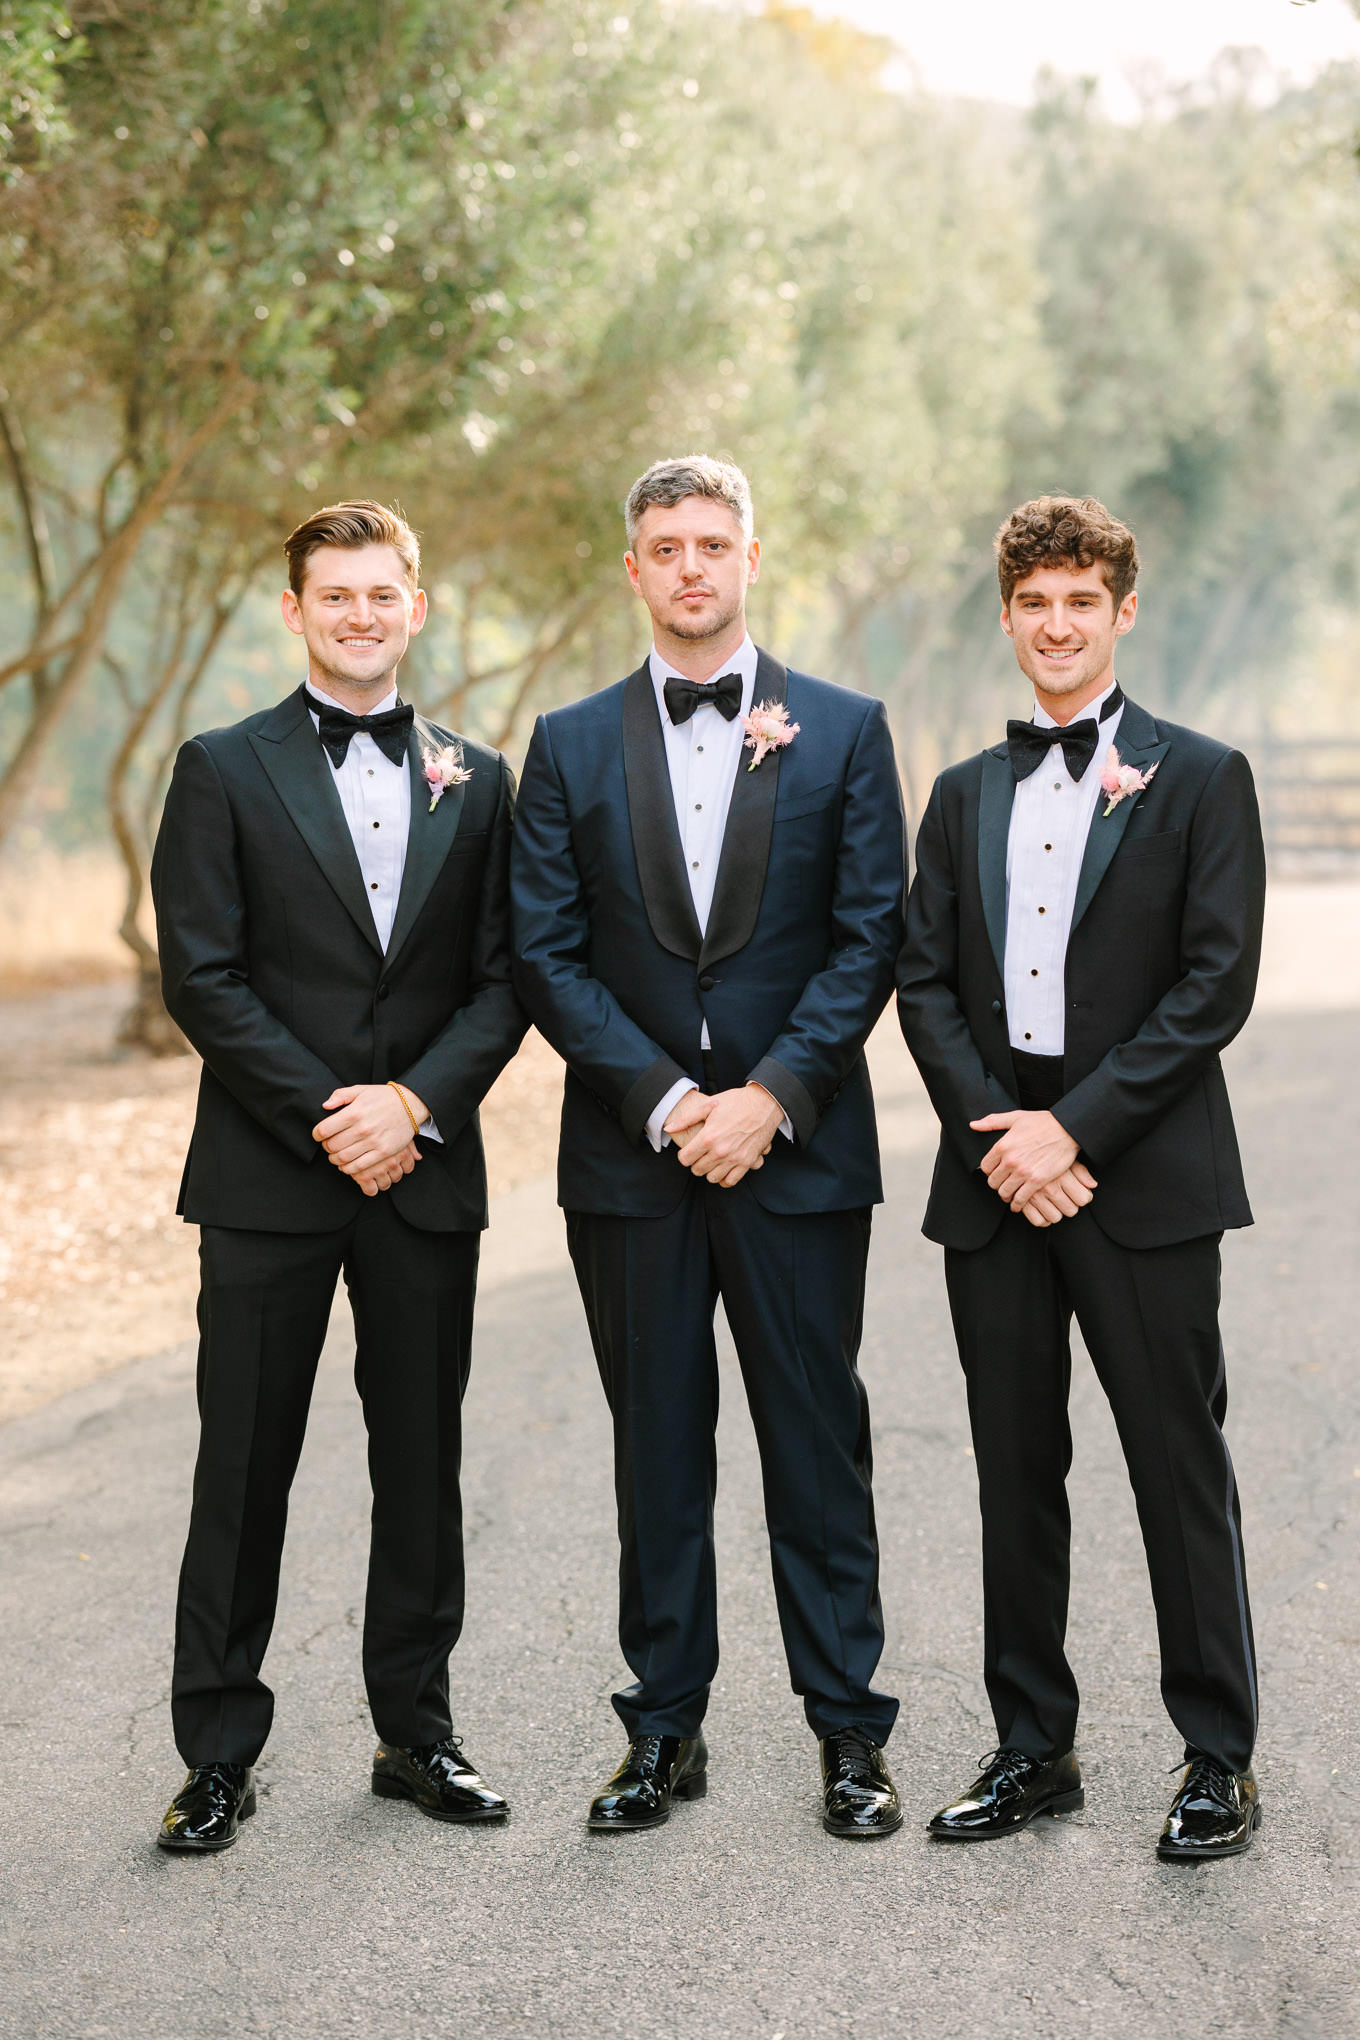 Groom with brothers | Colorful and quirky wedding at Higuera Ranch in San Luis Obispo | #sanluisobispowedding #californiawedding #higueraranch #madonnainn   
Source: Mary Costa Photography | Los Angeles